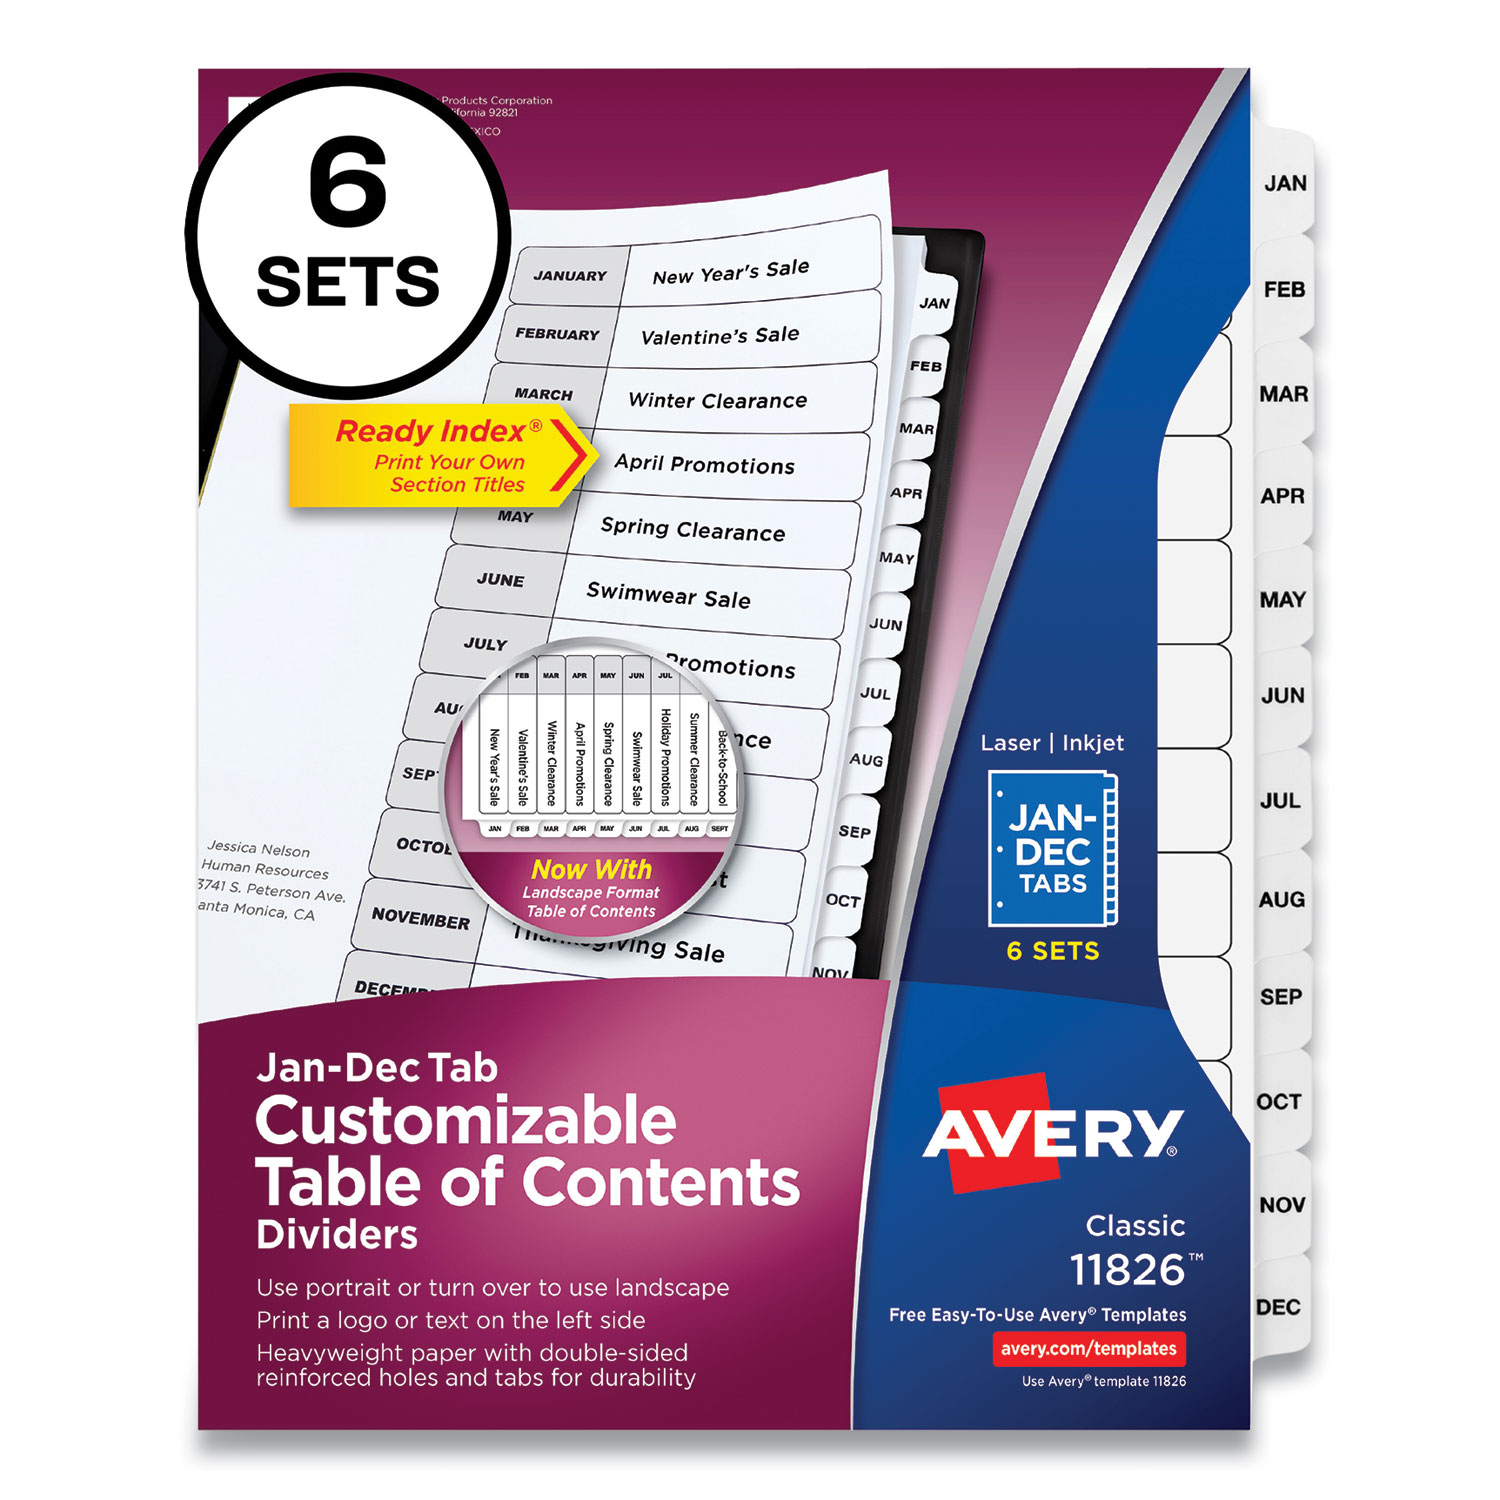 Avery® Customizable Table of Contents Ready Index Black and White Dividers, 12-Tab, Jan. to Dec., 11 x 8.5, 6 Sets